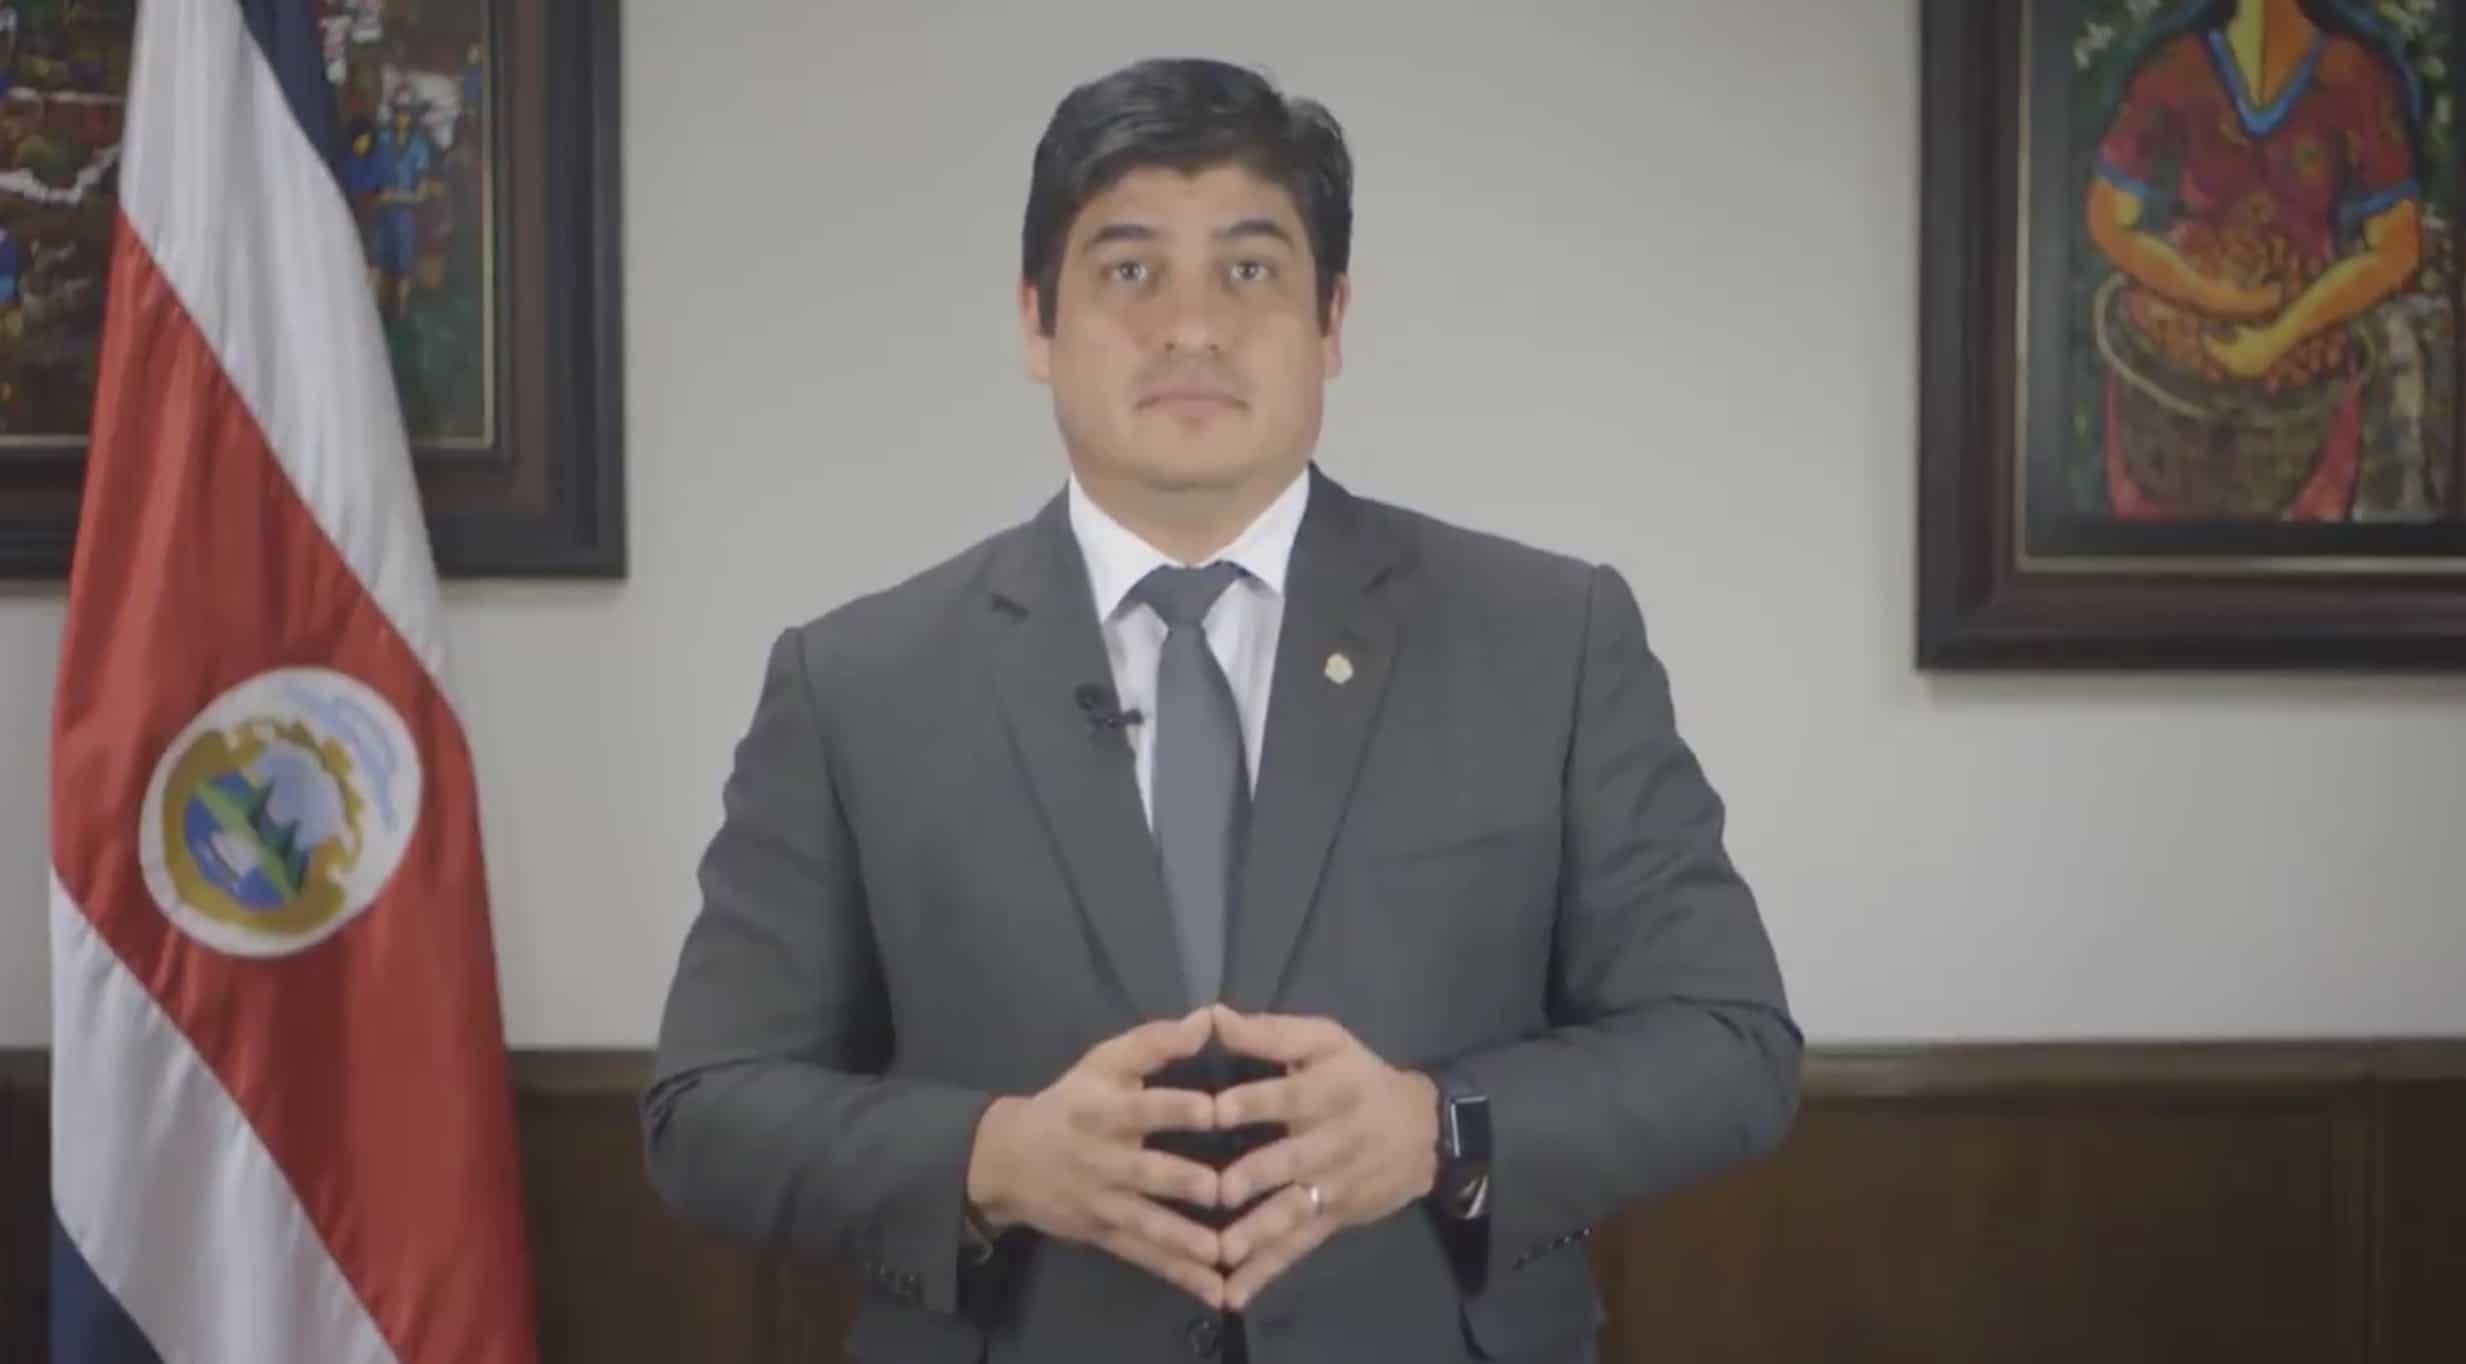 Costa Rican President Carlos Alvarado speaks in a video address to the country.